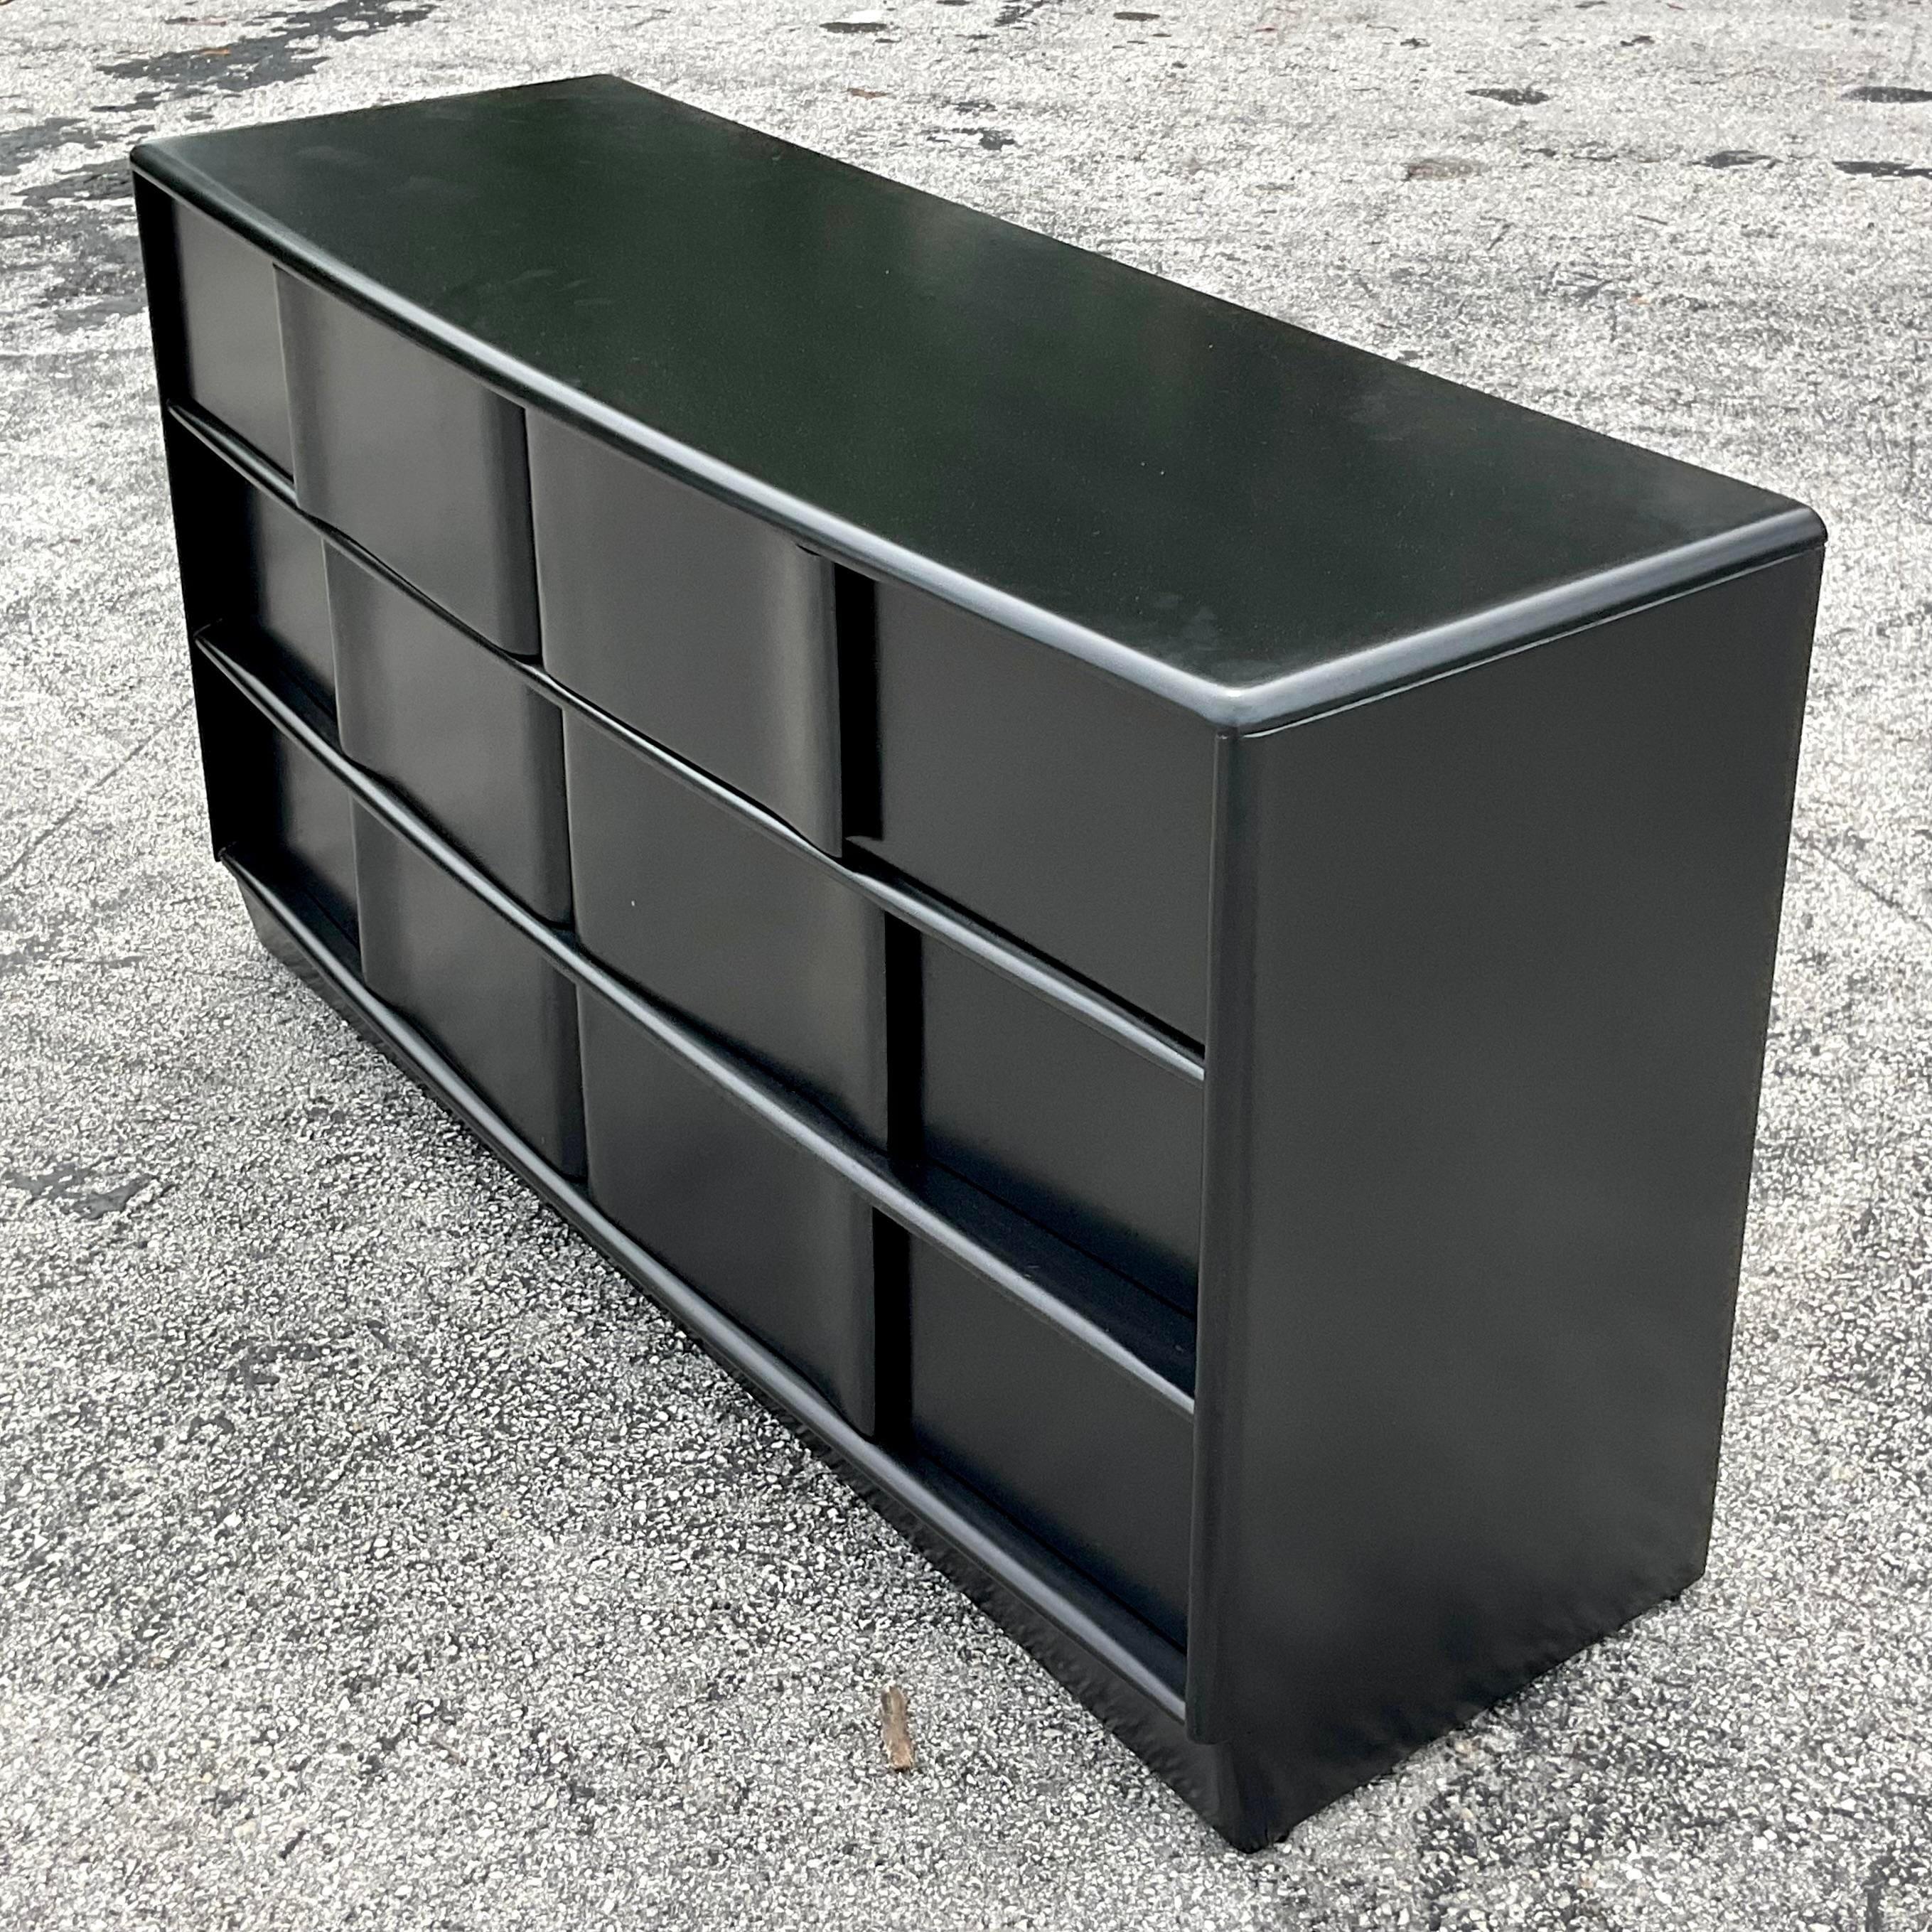 A fabulous vintage MCM dresser. The coveted Heywood Wakefield wave front dresser. Painted a chic matte black. Tagged on the inside. Acquired from a Palm Beach estate.